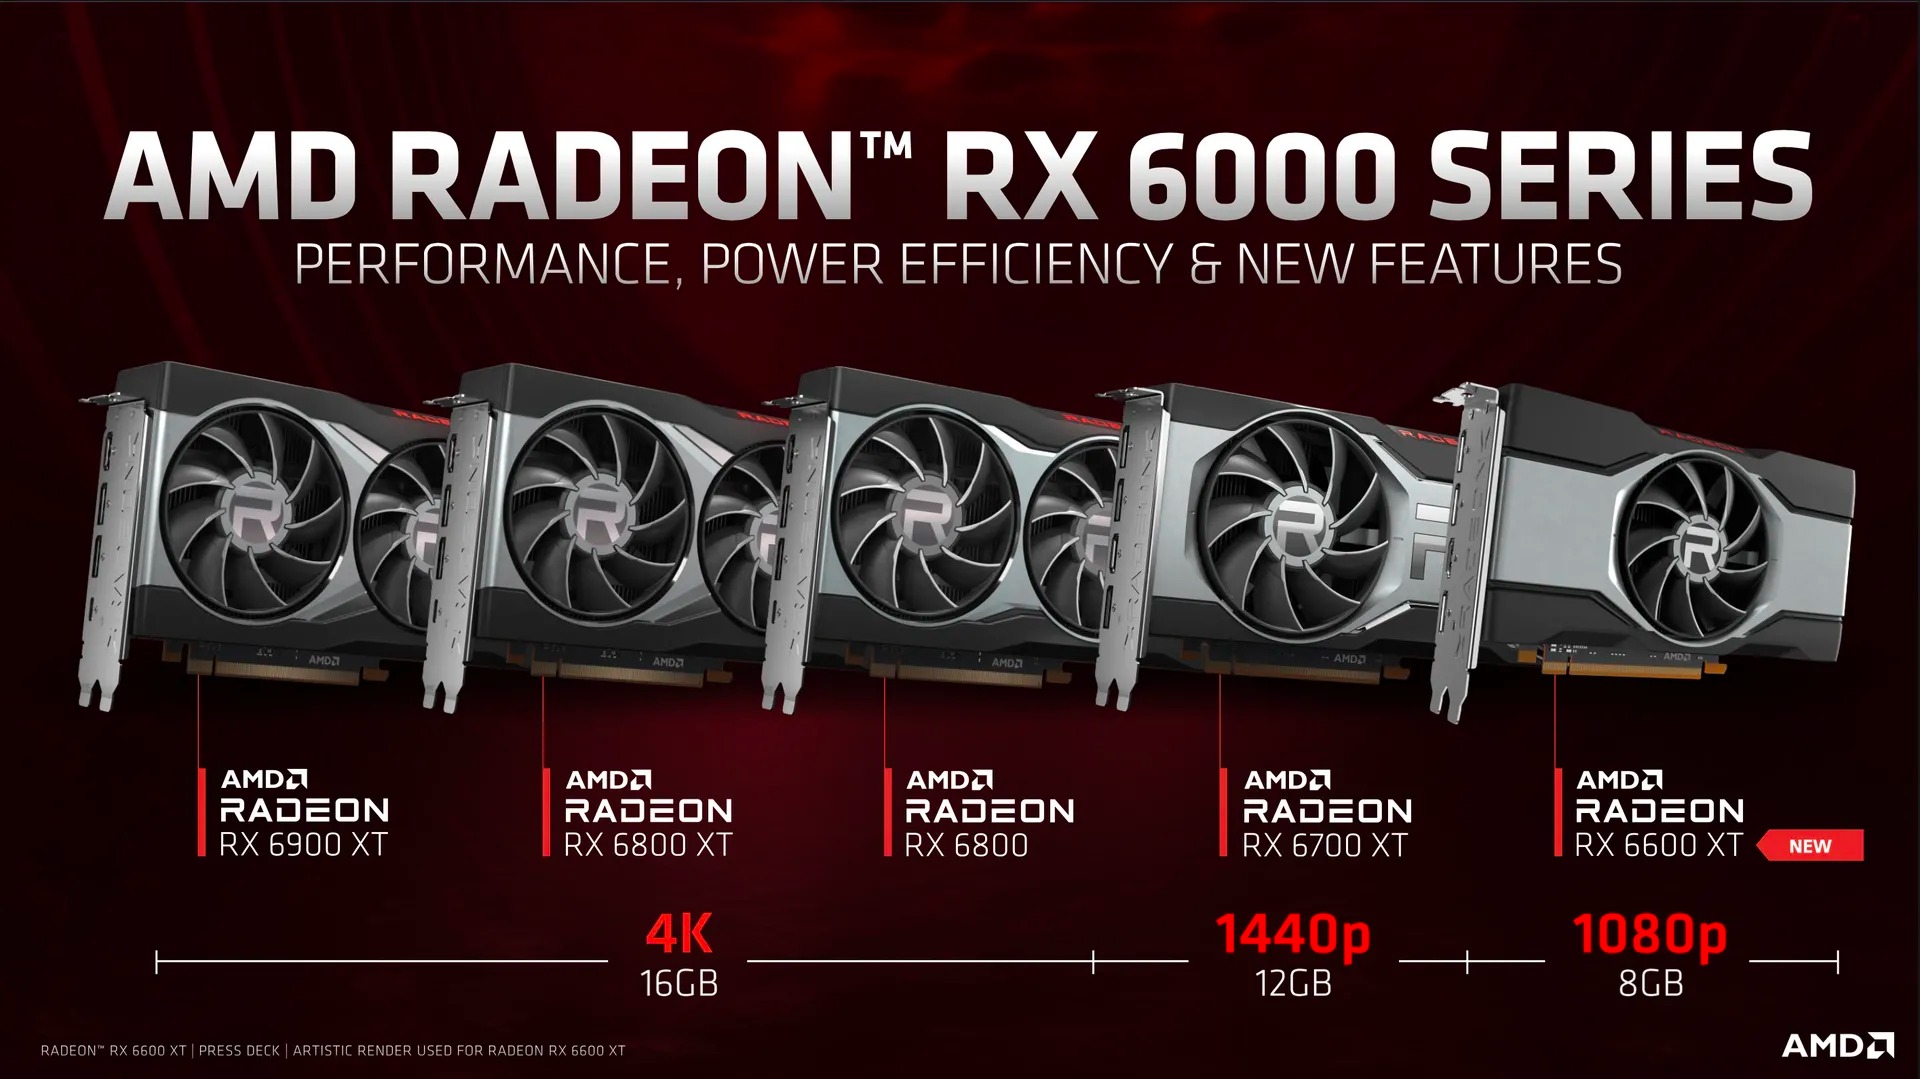 AMD Radeon RX 6600 XT with 2048 cores and 8GB G6 memory officially launches on August 11th at